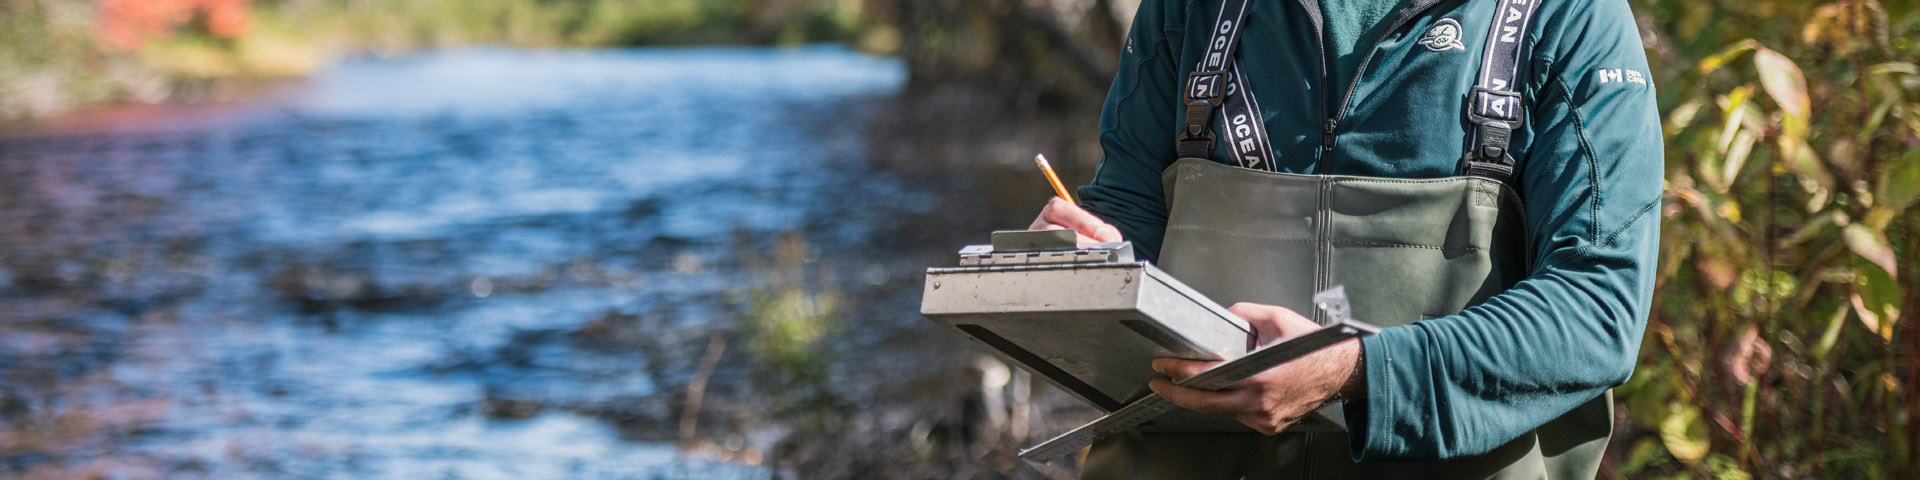 A Conservation officer stands next to a river, writing notes.